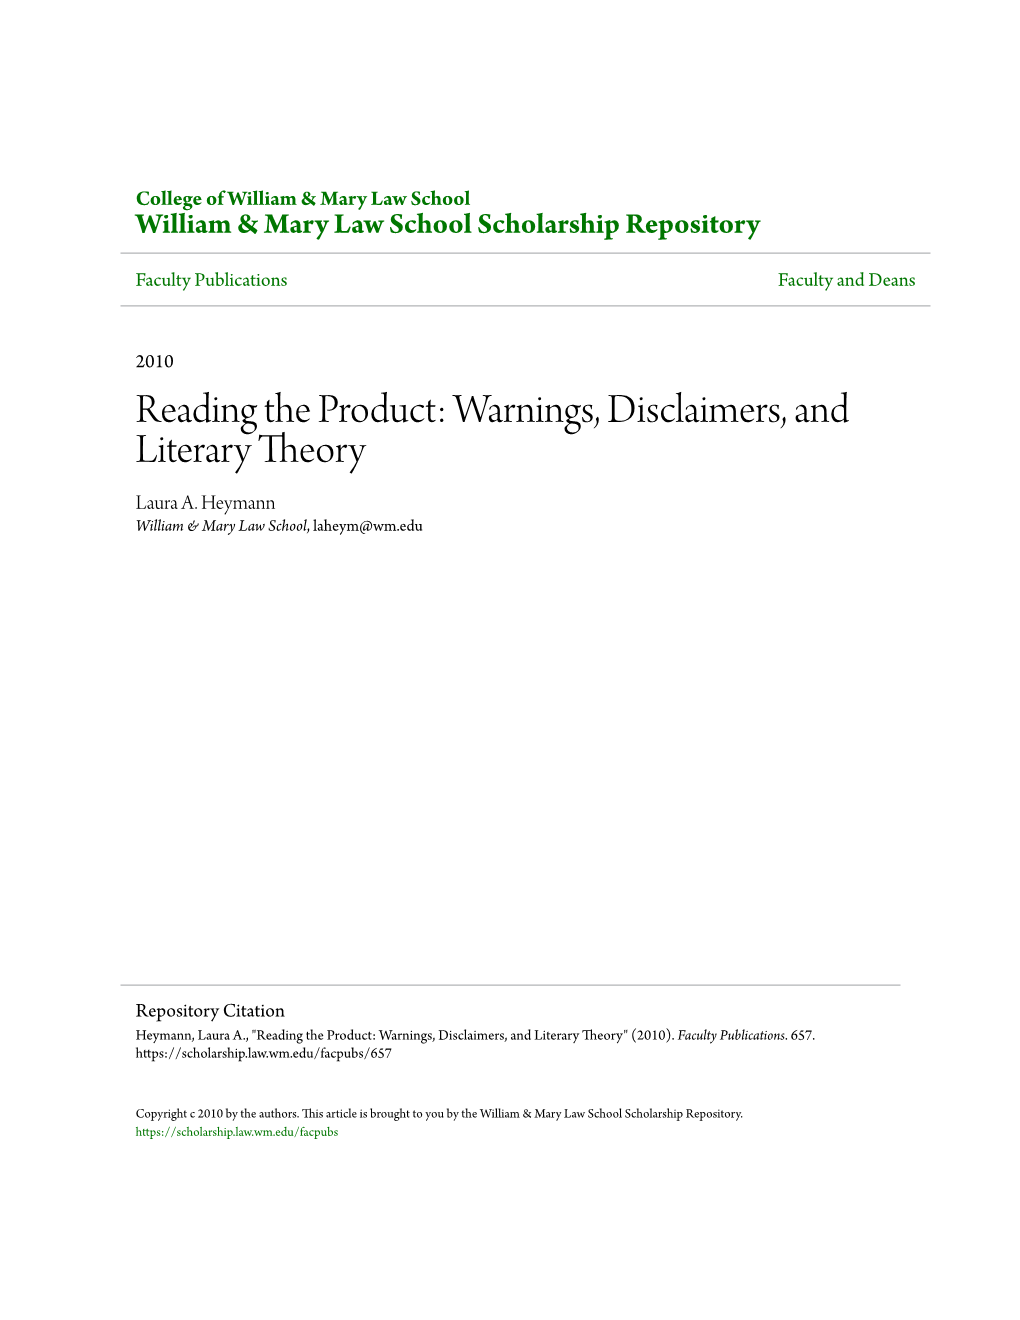 Warnings, Disclaimers, and Literary Theory Laura A